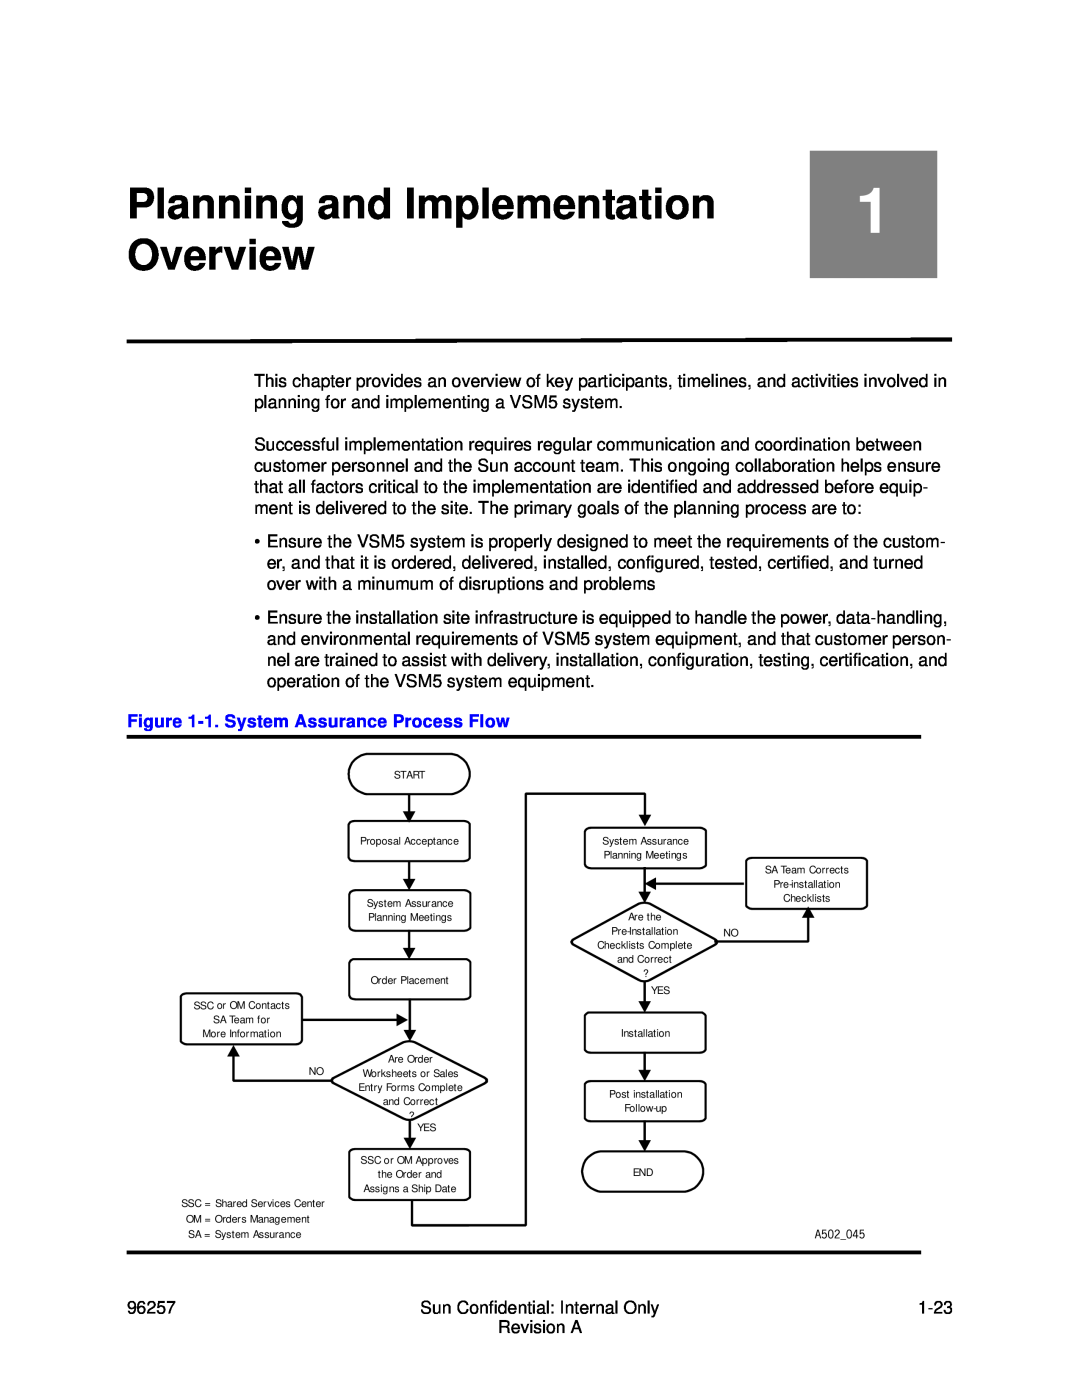 Sun Microsystems 96257 manual Planning and Implementation, Overview, 1. System Assurance Process Flow 